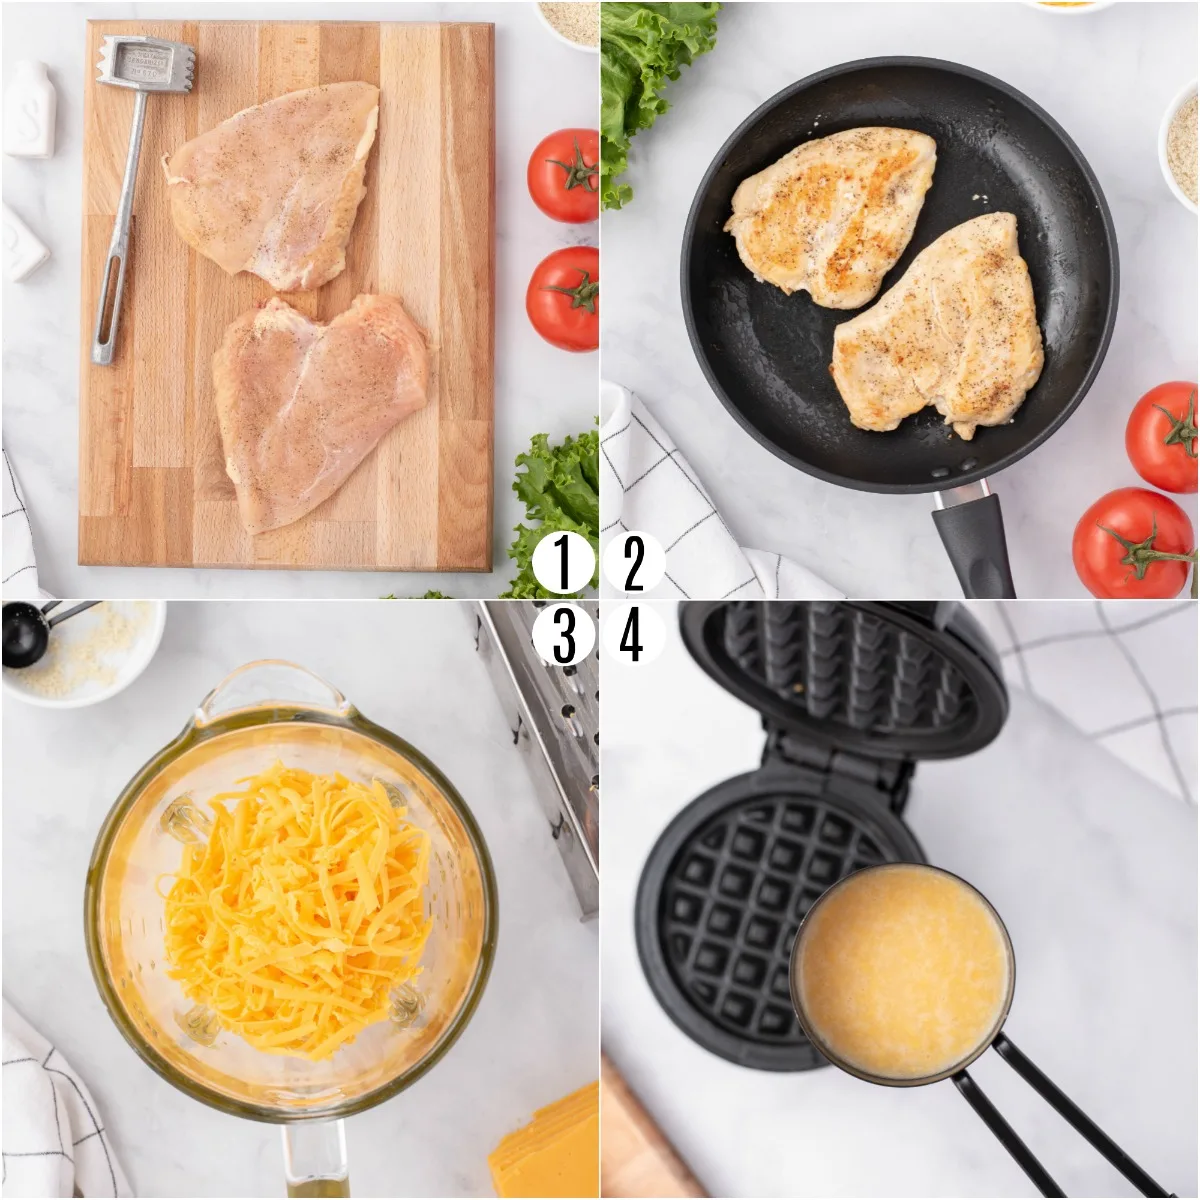 Step by step photos showing how to cook chicken and chaffles.